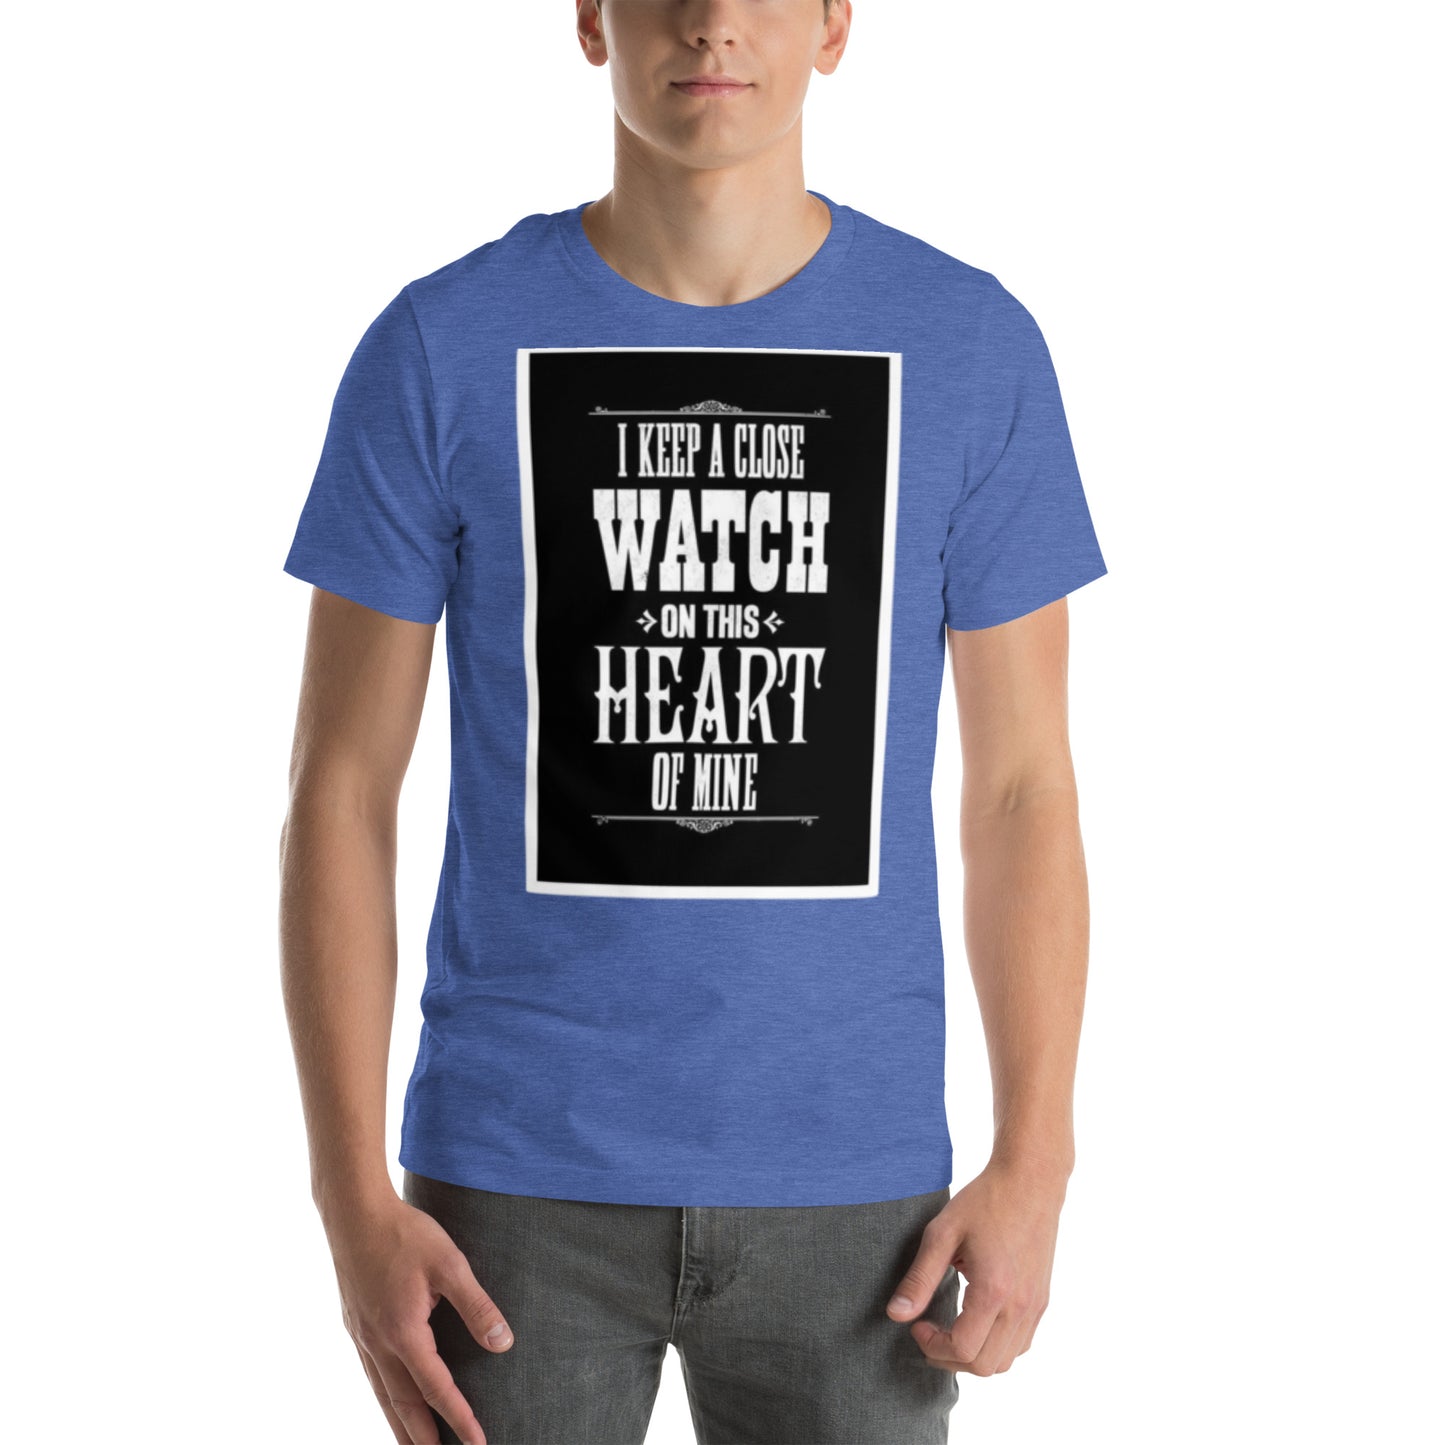 Close Watch - Get Your Twang On with Classic Country Tees - The Ultimate Unisex T-Shirt for True Country Souls! - Classic Country Tees